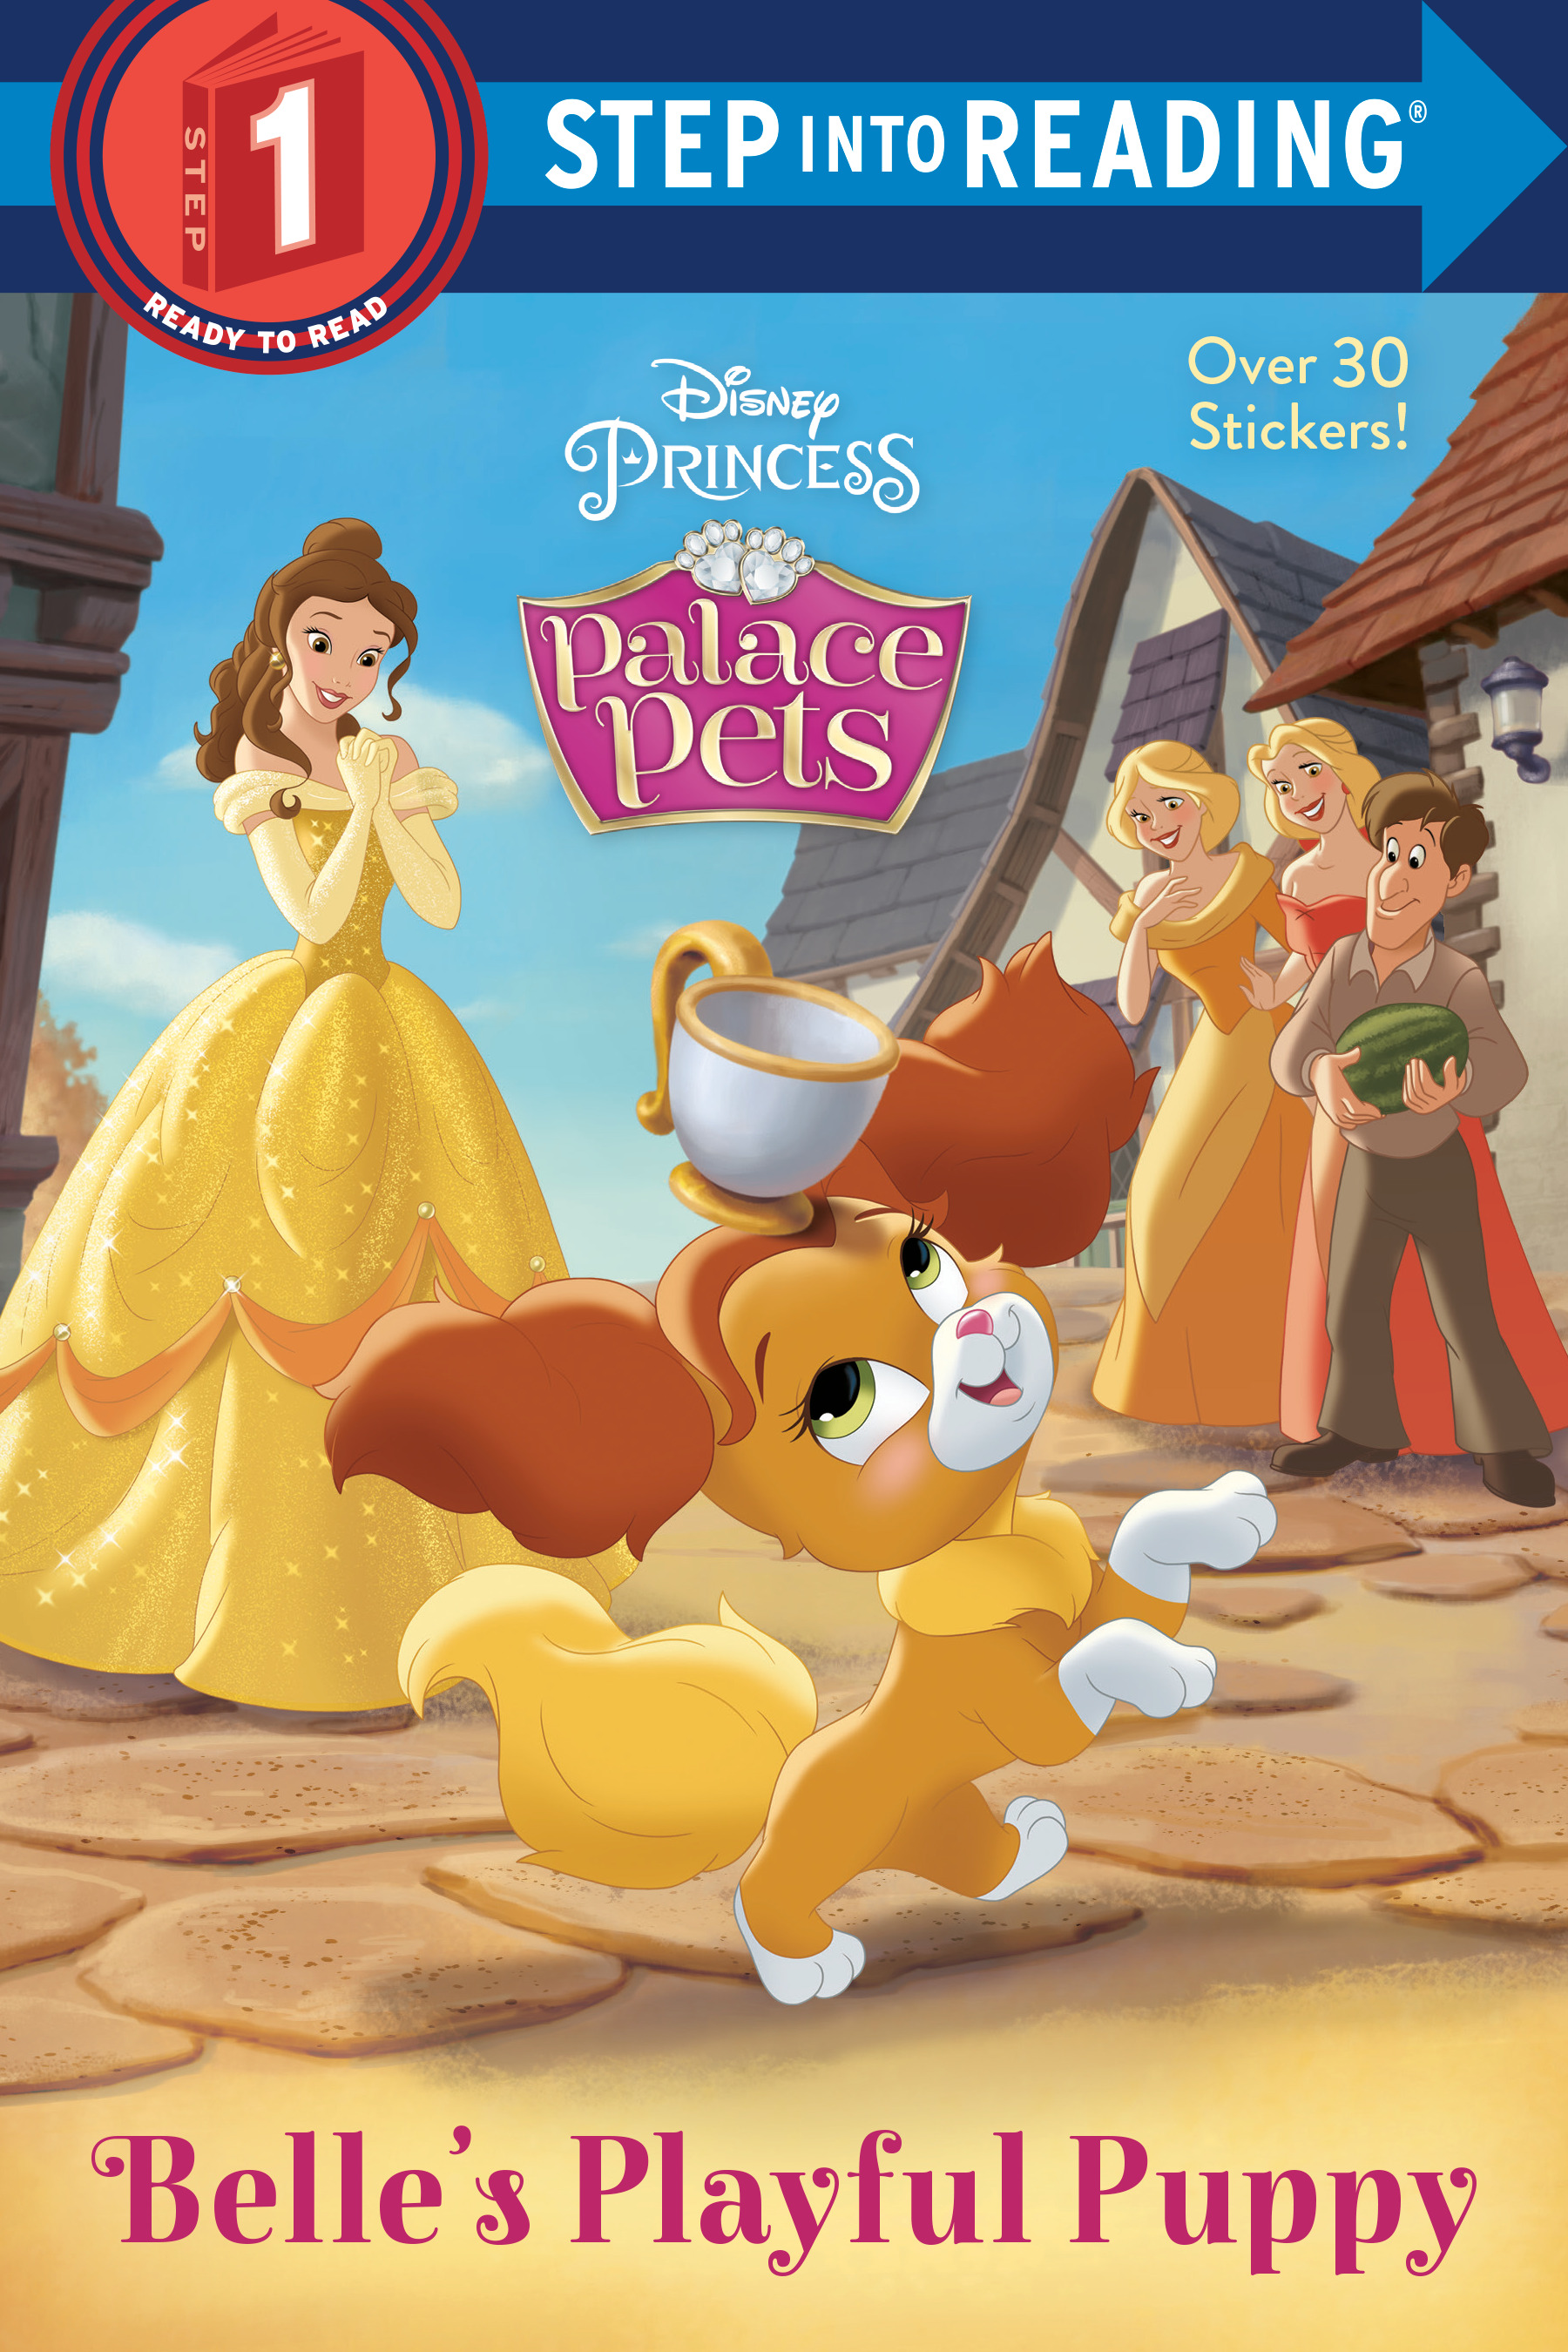 Step Into Reading - Belle's Playful Puppy (Disney Princess: Palace Pets) | First reader